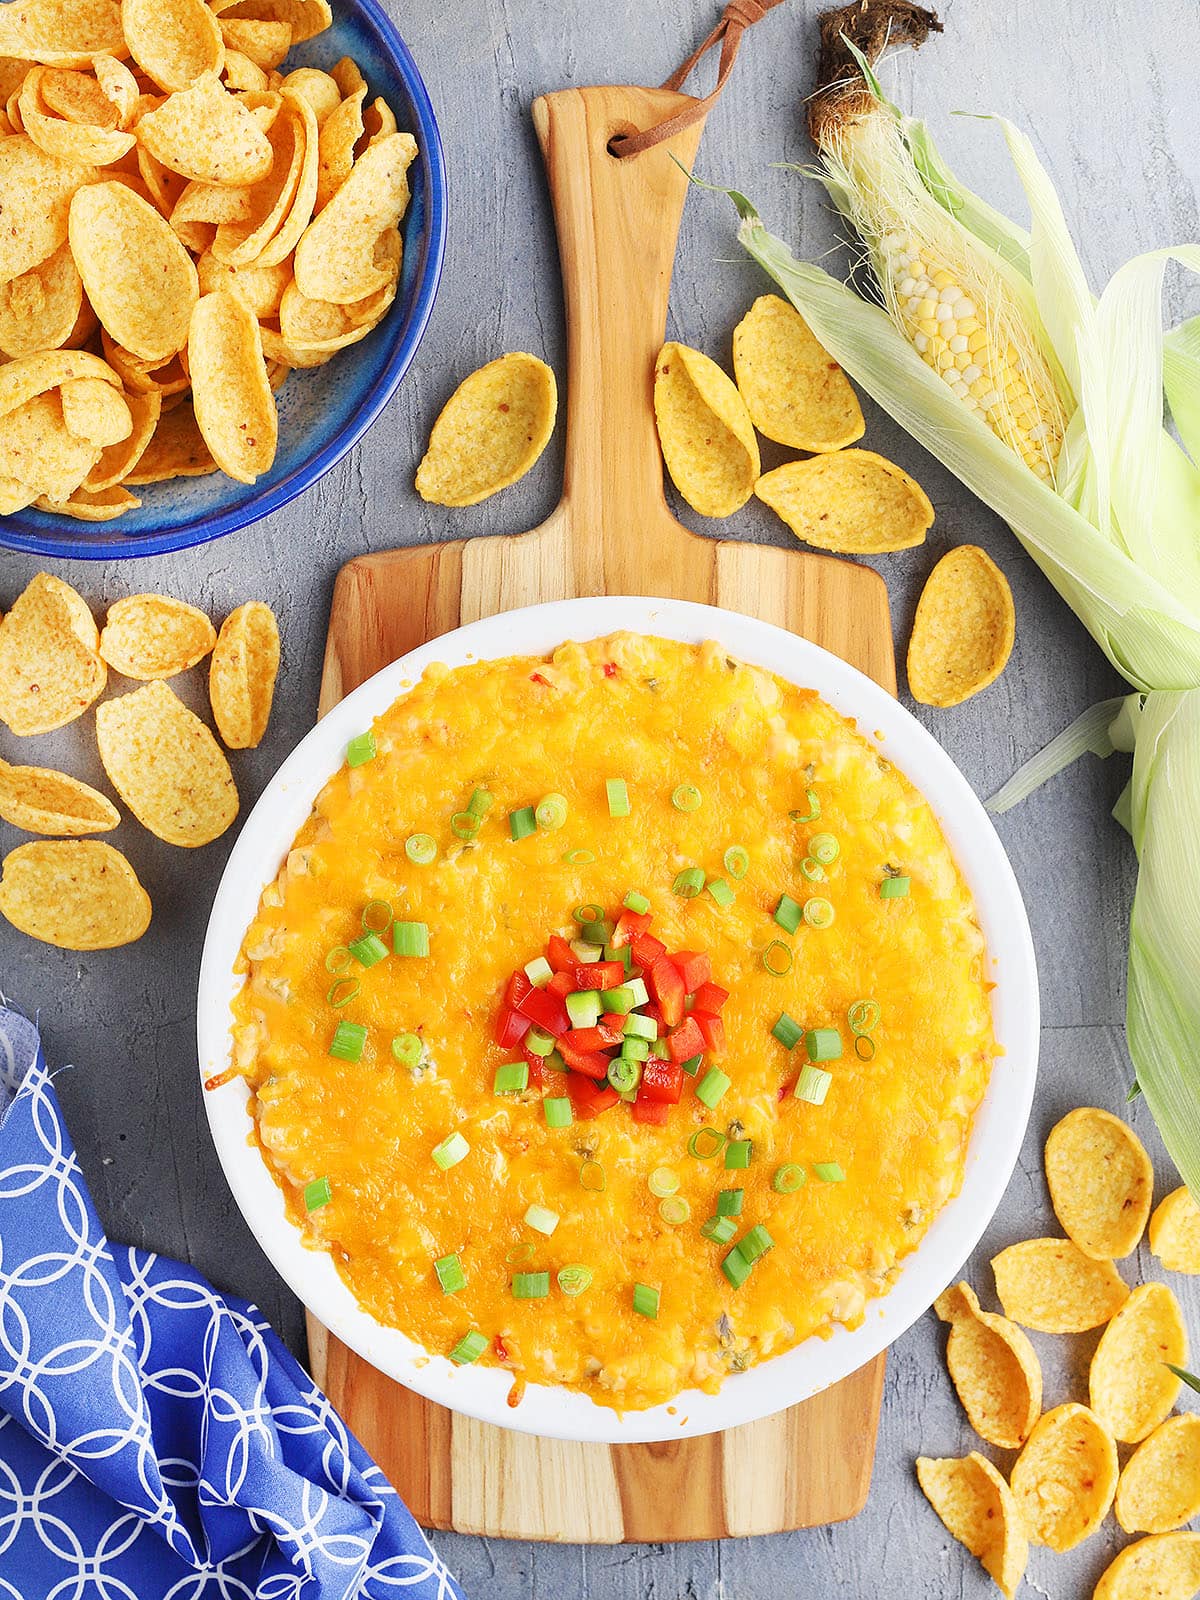 hot corn dip with cream cheese in a white pie plate garnished with green onions and red and green diced bell peppers. The plate rests on a wooden cutting board and a blue of corn chips sits to the side. Loose corn chips are sprinkled around.